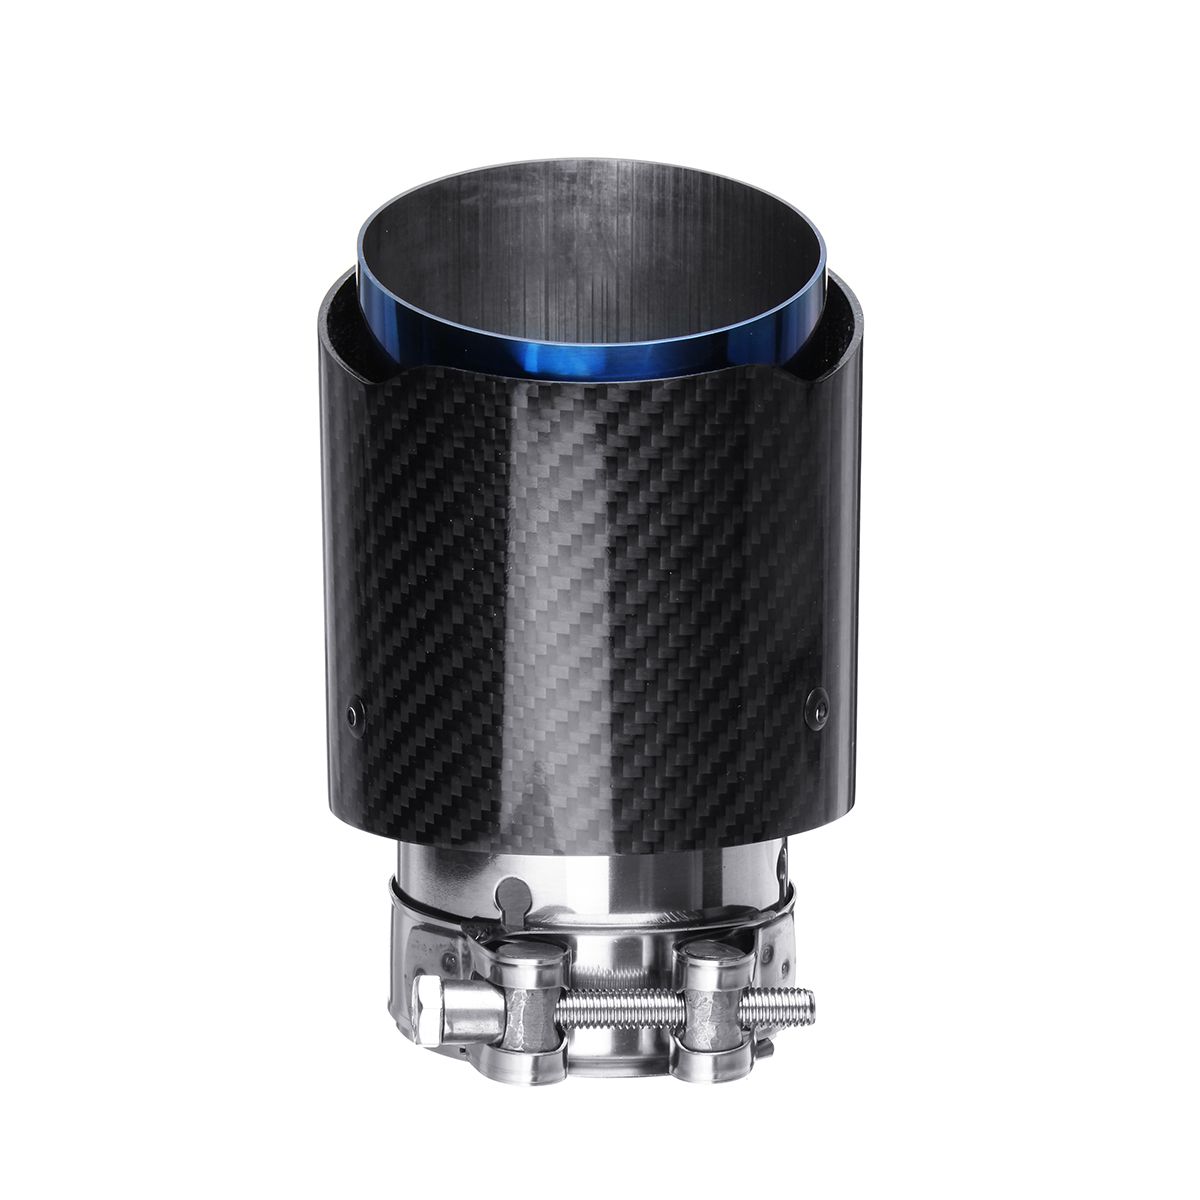 76MM-101MM-Outlet-Car-Carbon-Fiber-Stainless-Steel-Car-Rear-Exhaust-Tip-Pipe-Muffler-Adapter-Reducer-1681982